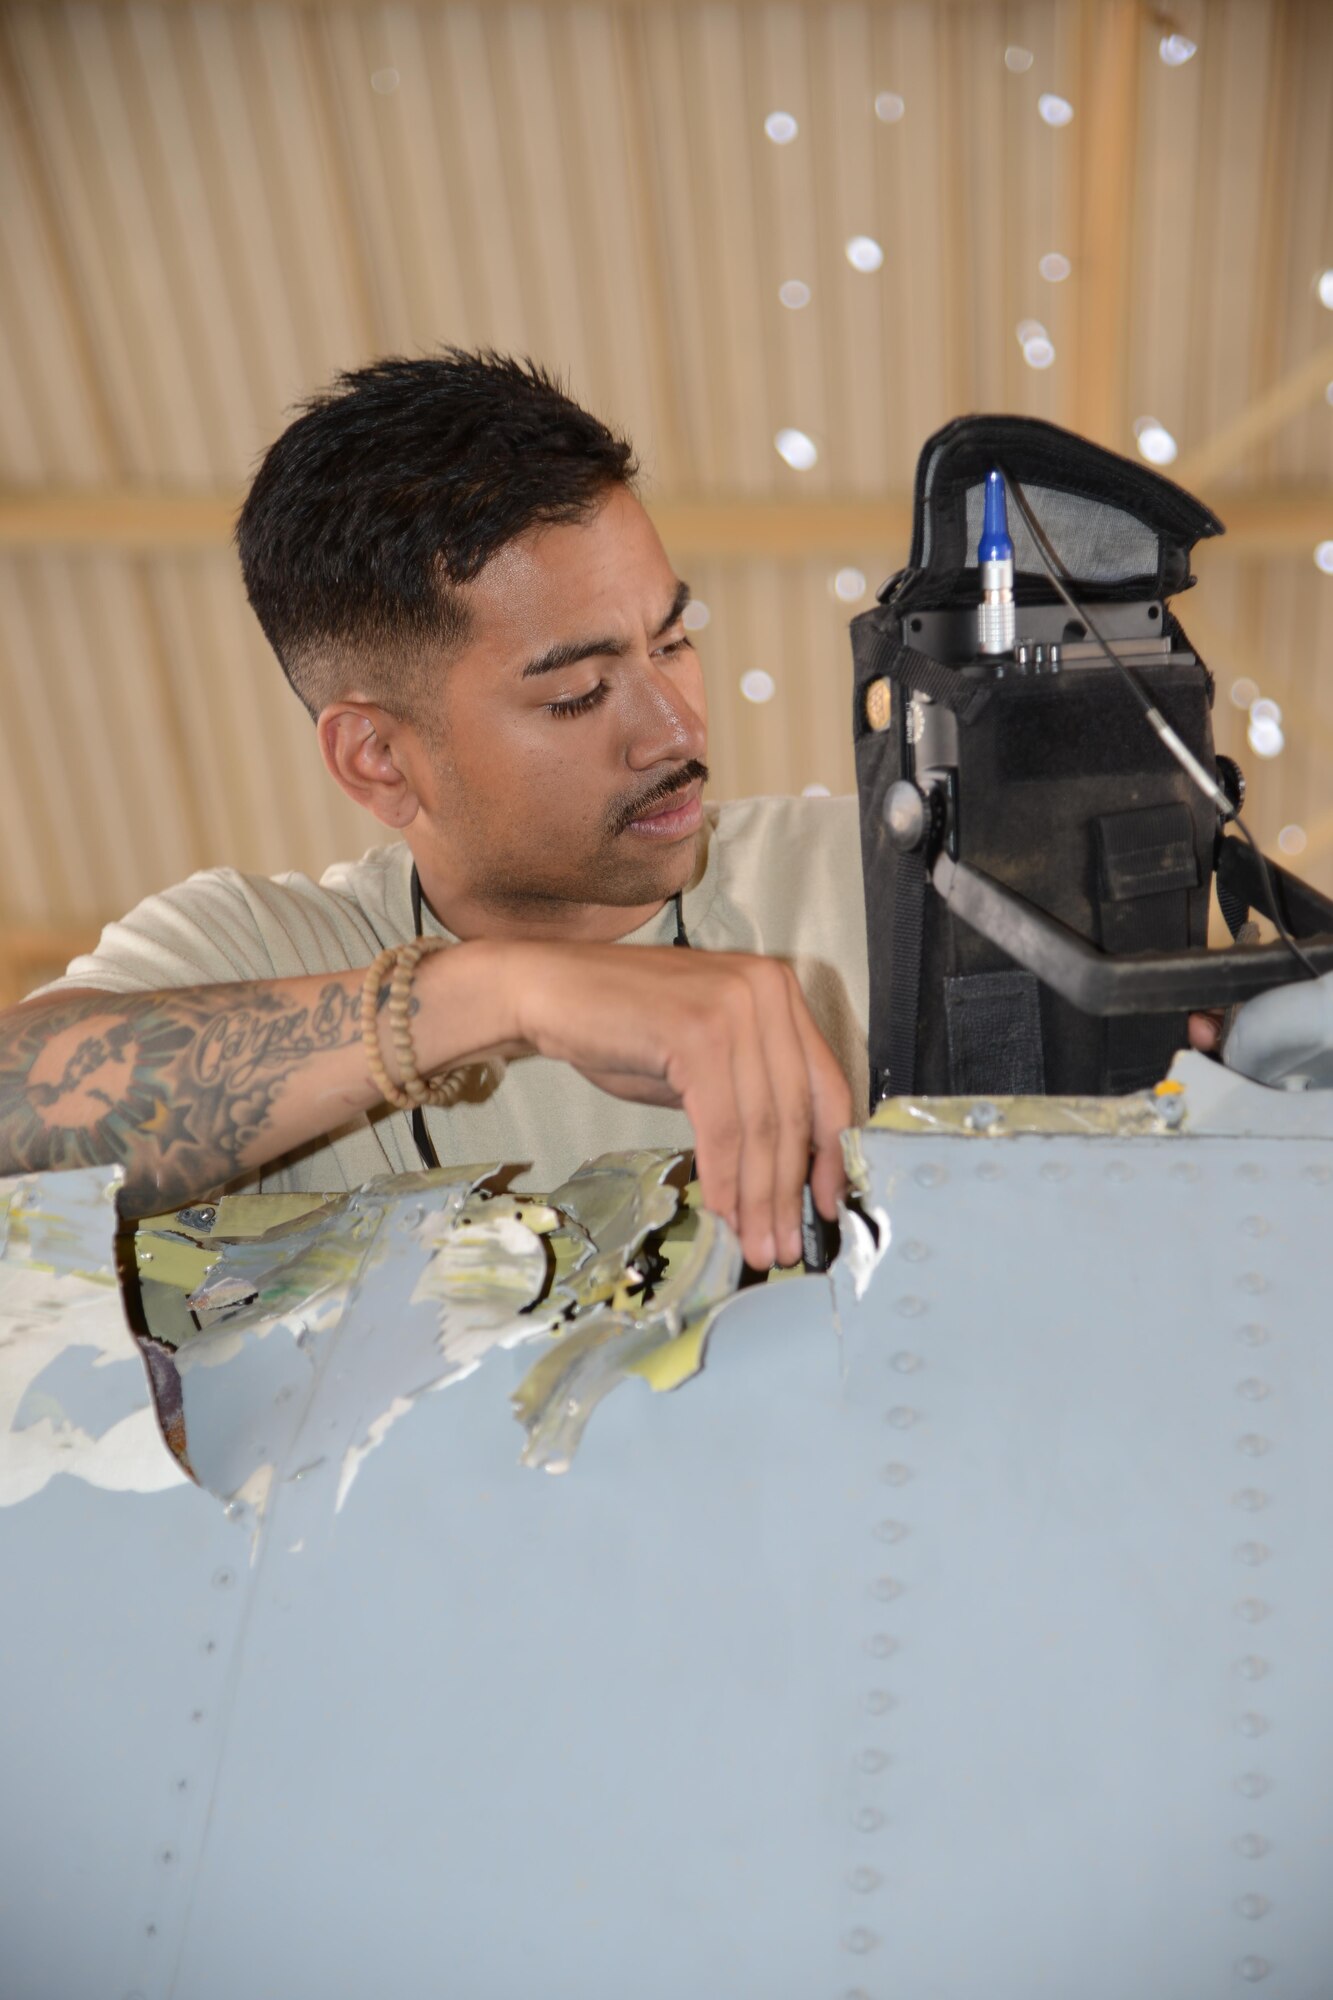 An Airman with the 332nd Expeditionary Maintenance Group perform a non-destructive inspection on a damaged verticle stabilizer from an A-10C Thunderbolt II at Al Asad Air Base, Iraq. A maintenance response team from the 332nd EMXG repaired the jet and got it back in the air less than five days after the jet suffered catastrophic engine failure and had to divert there. (U.S. Air Force photo by Tech. Sgt. Jared Marquis/released)